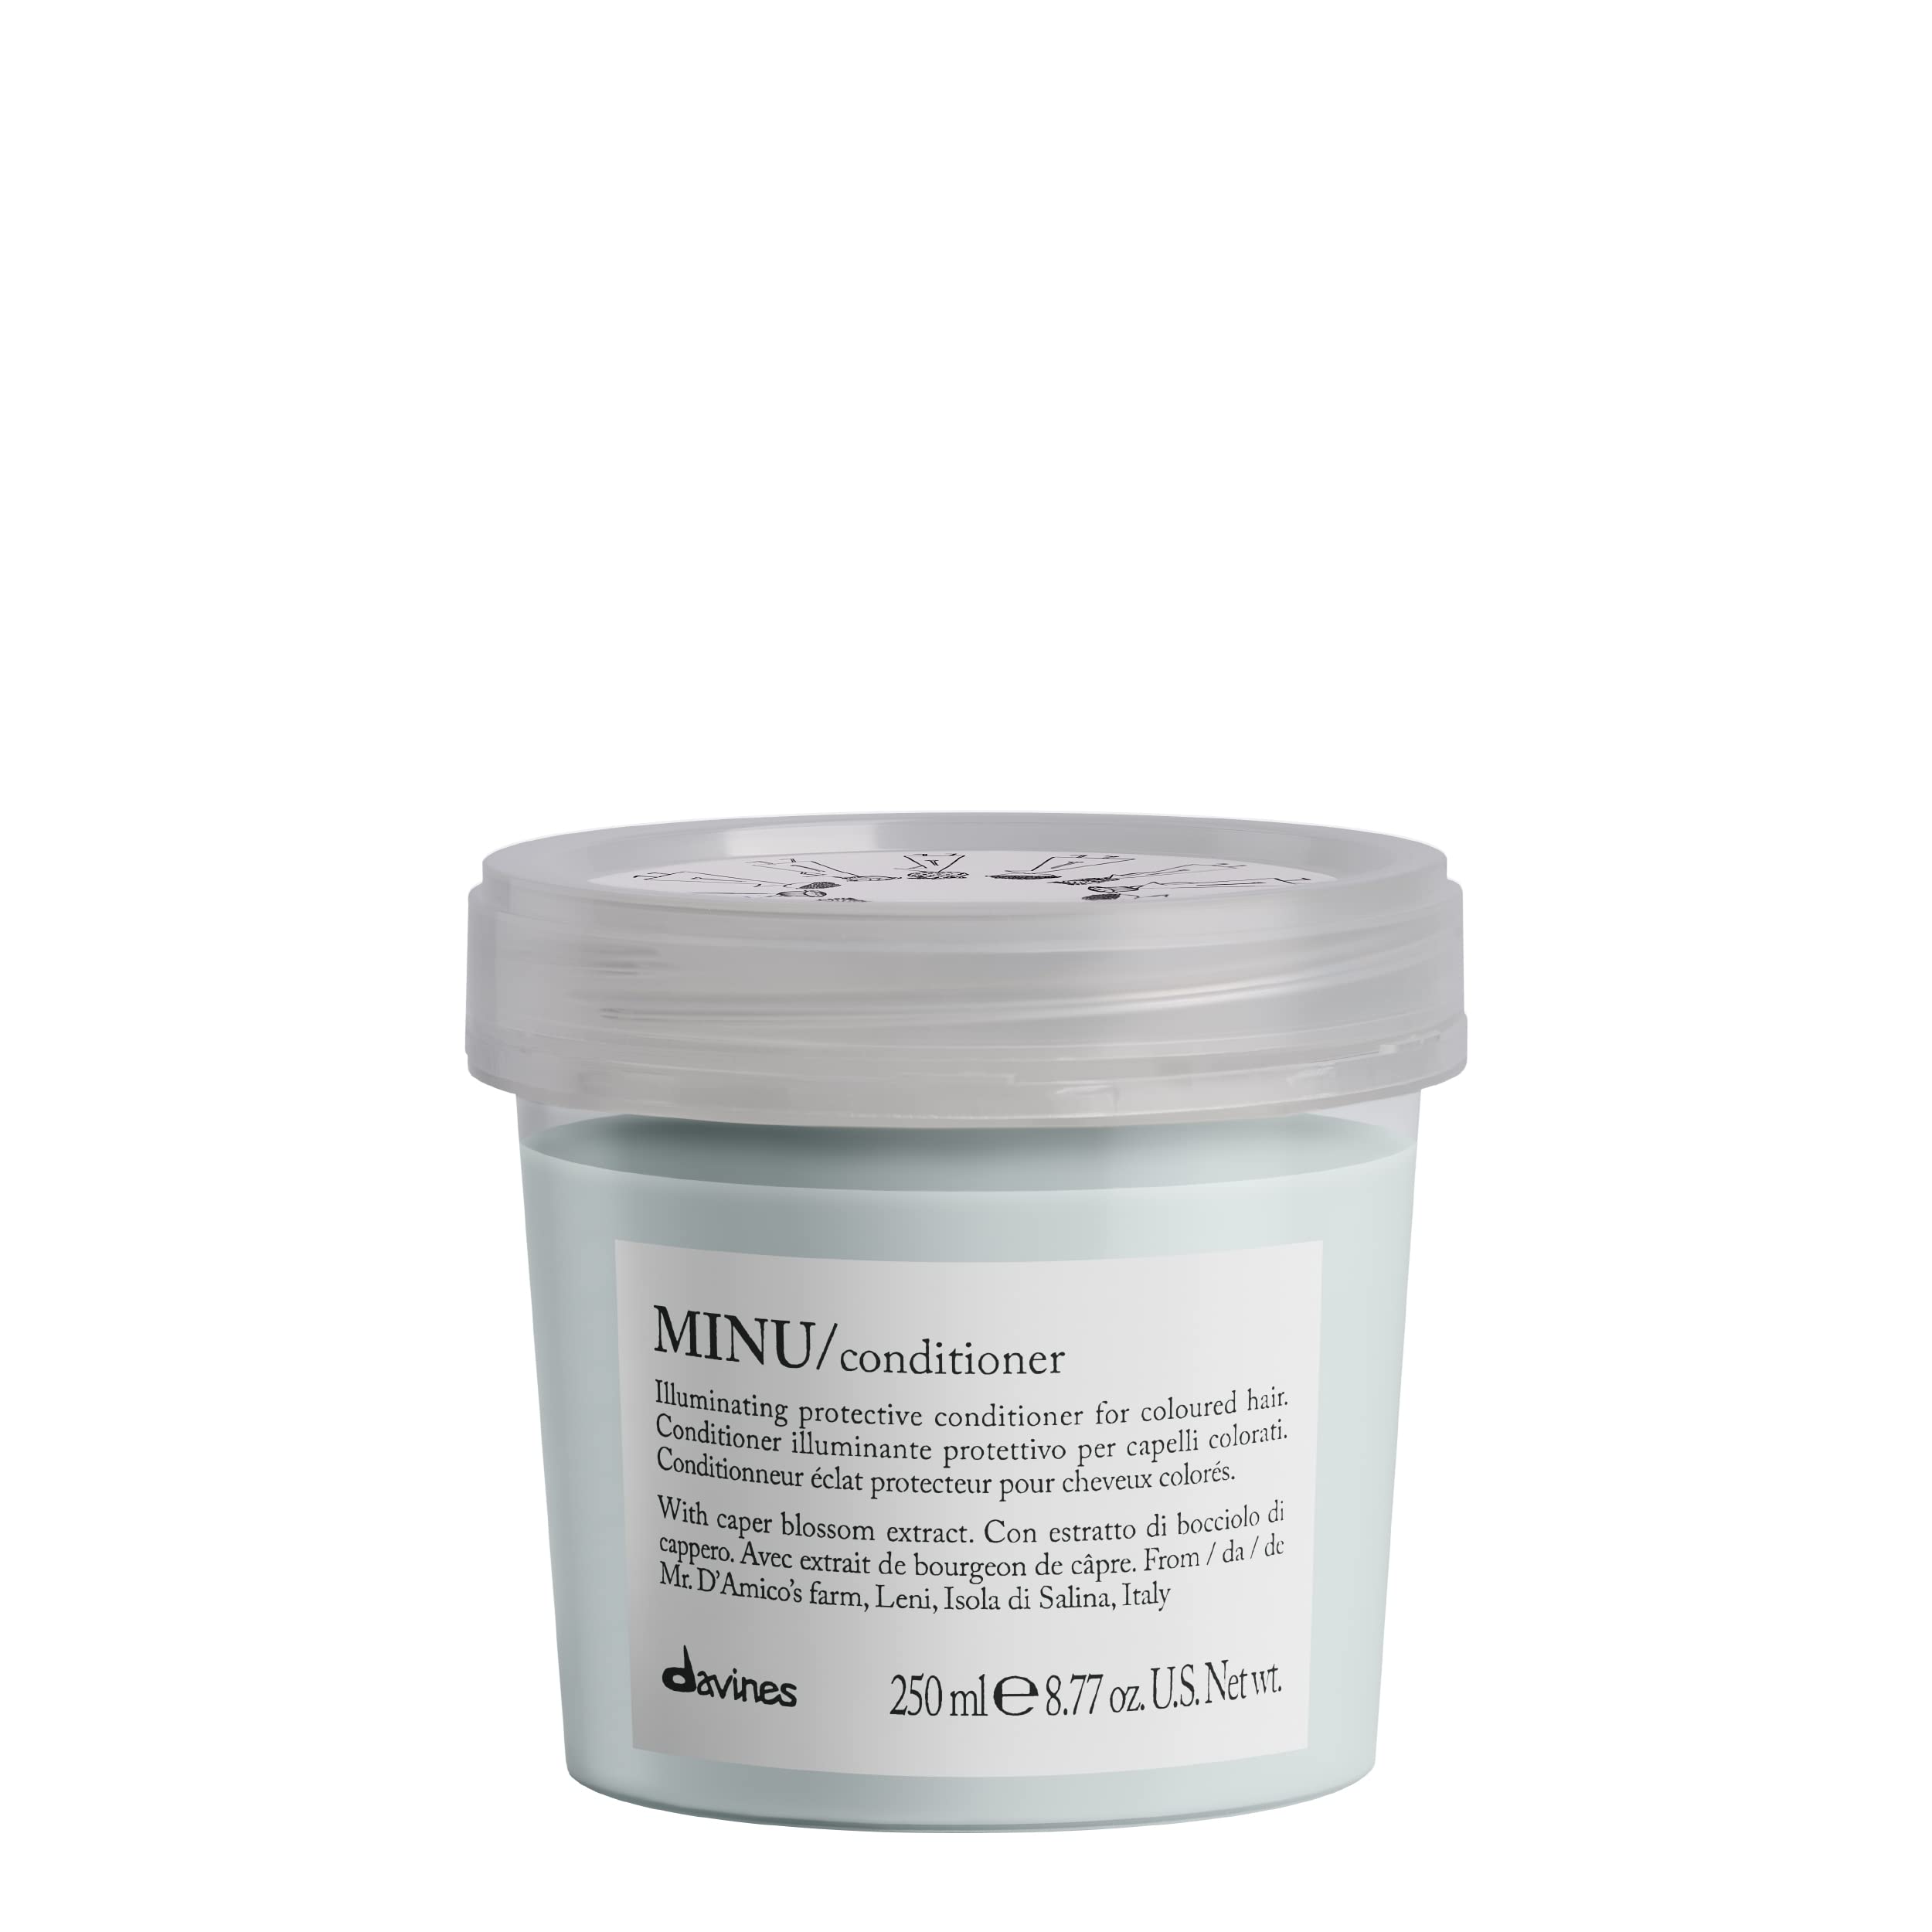 Davines MINU Conditioner, Protect And Condition Color Treated Hair, Add Shine And Detangle